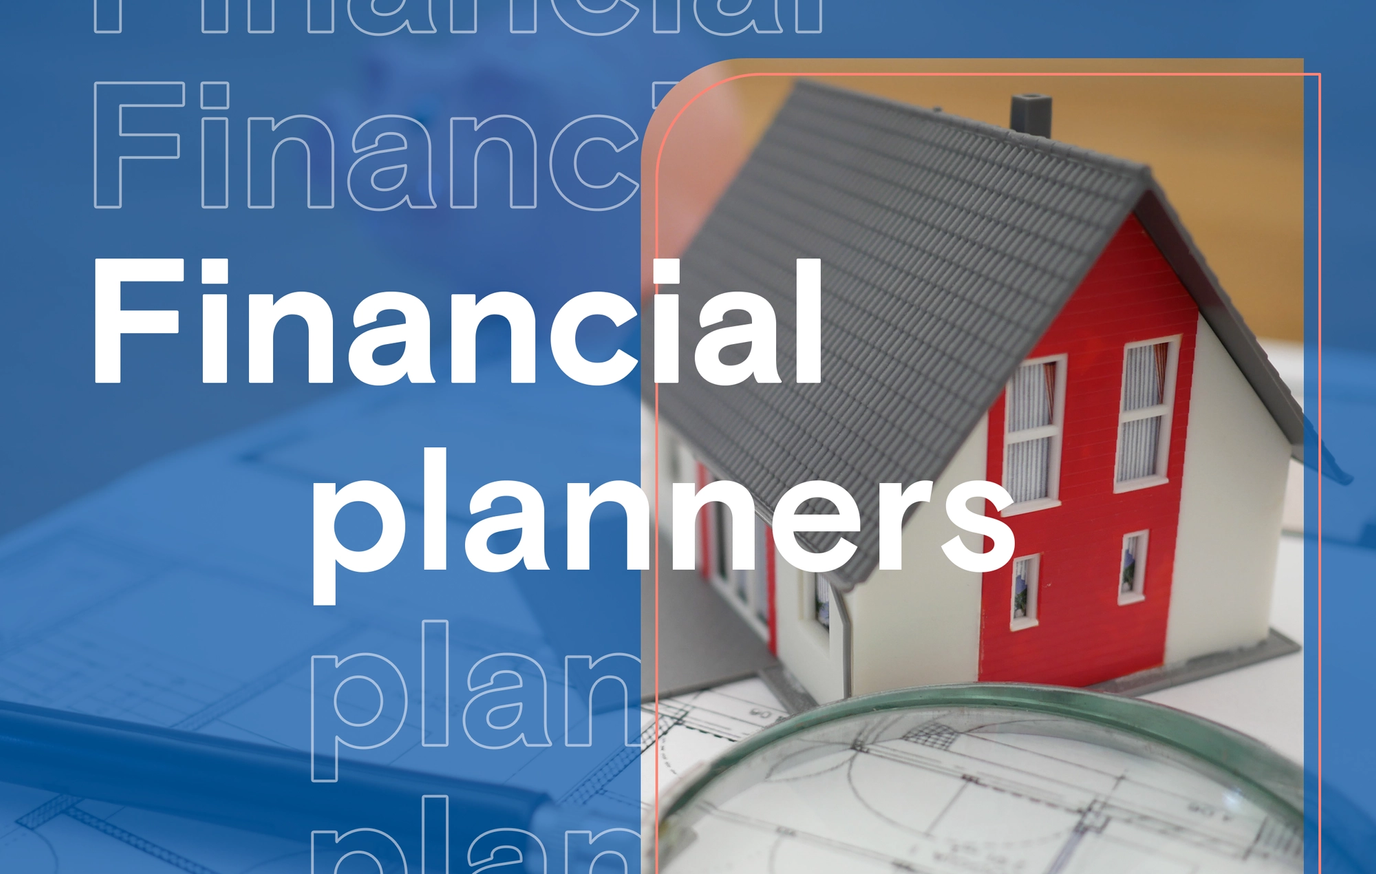 When do you need a financial planner?